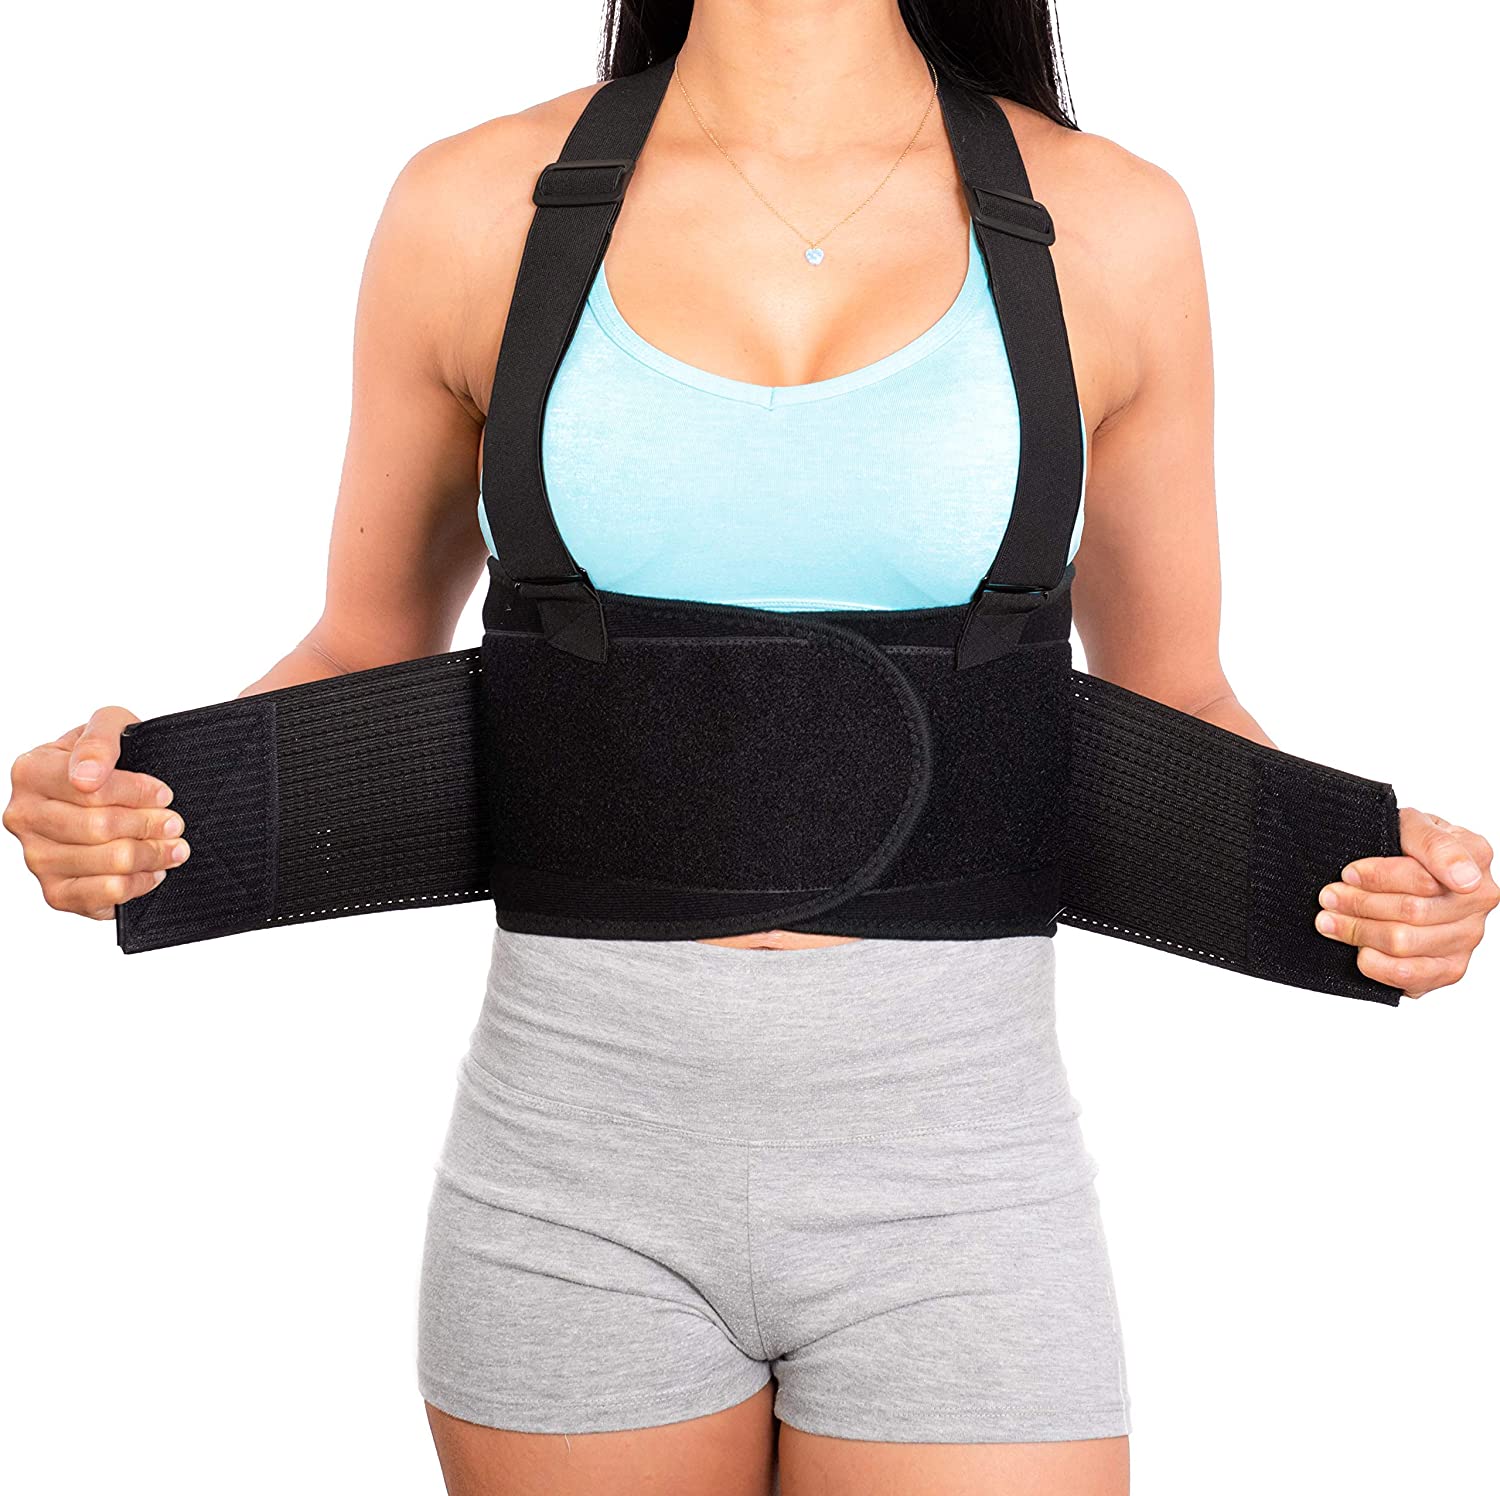 NeoHealth Back Support Braces for Pain Relief for Men and Women